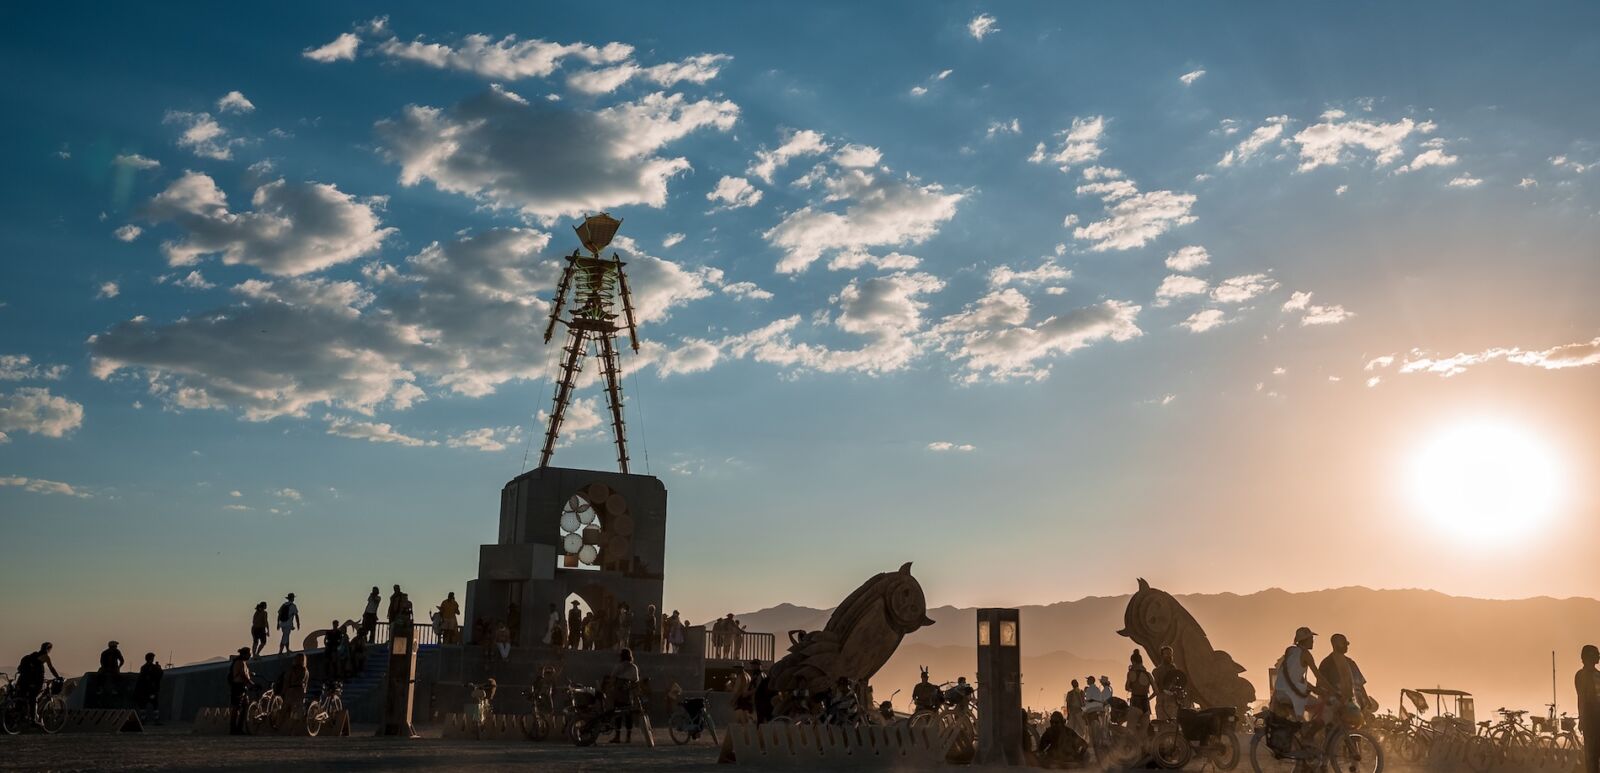 Nevada, United States. September 10, 2022. Beautiful desert with art objects at sunrise. Beautiful nature festival with people riding bicycles. Burning Man festival.